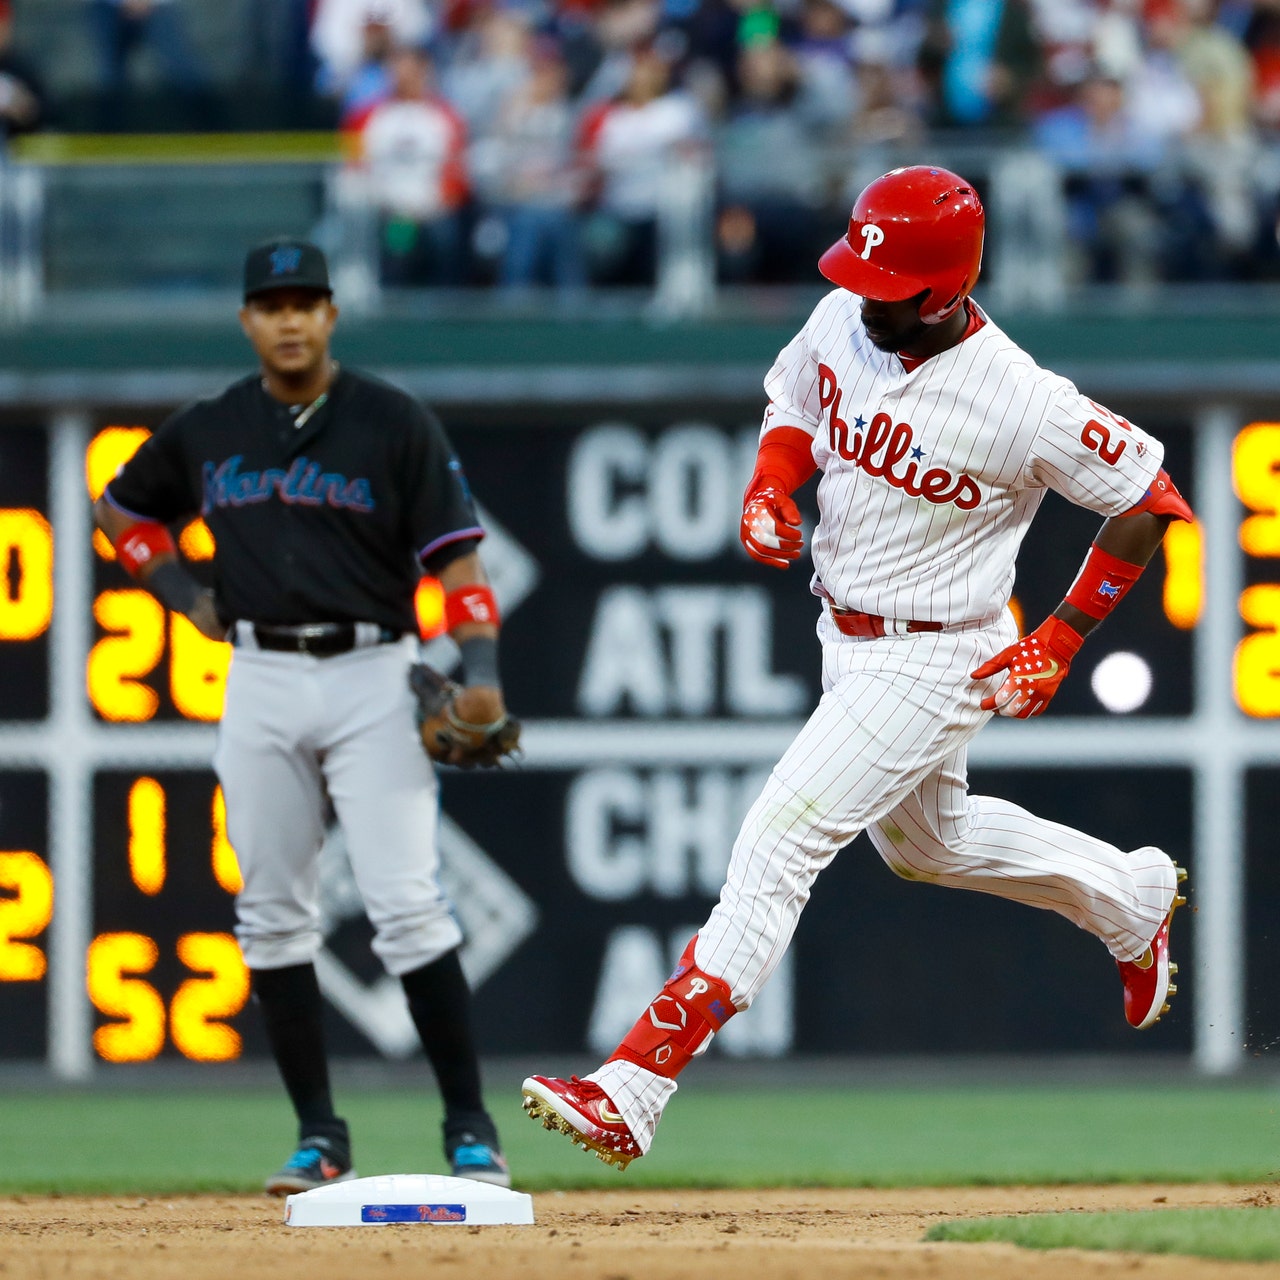 Jean Segura stays hot with 2-run base hit; 4-0 Phillies early